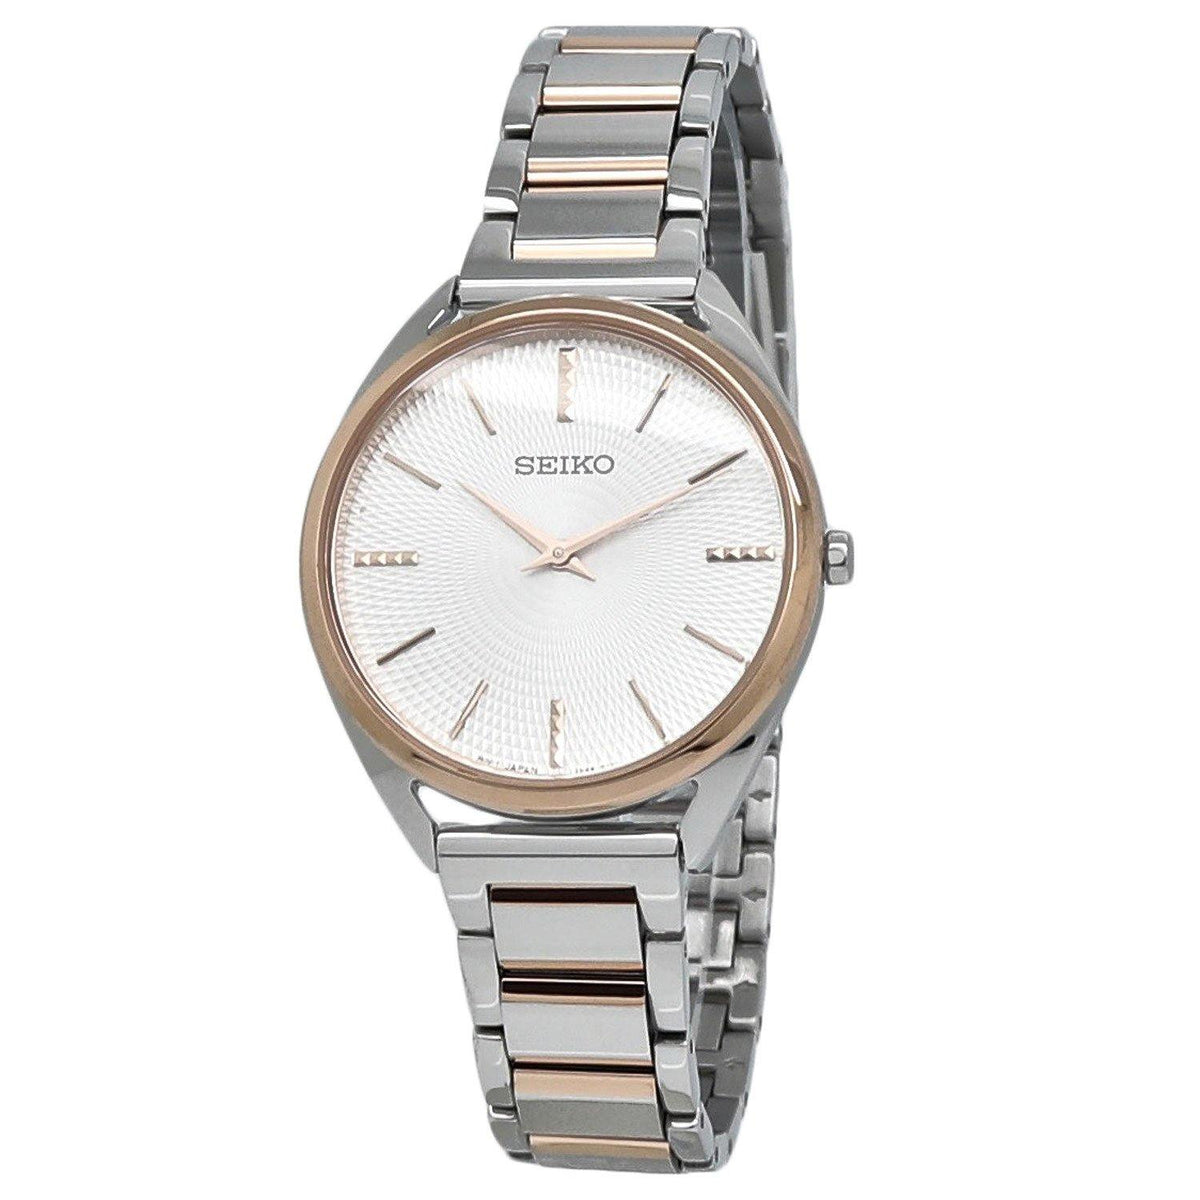 Seiko Conceptual SWR034 Silver Dial Ladies Watch – pass the watch